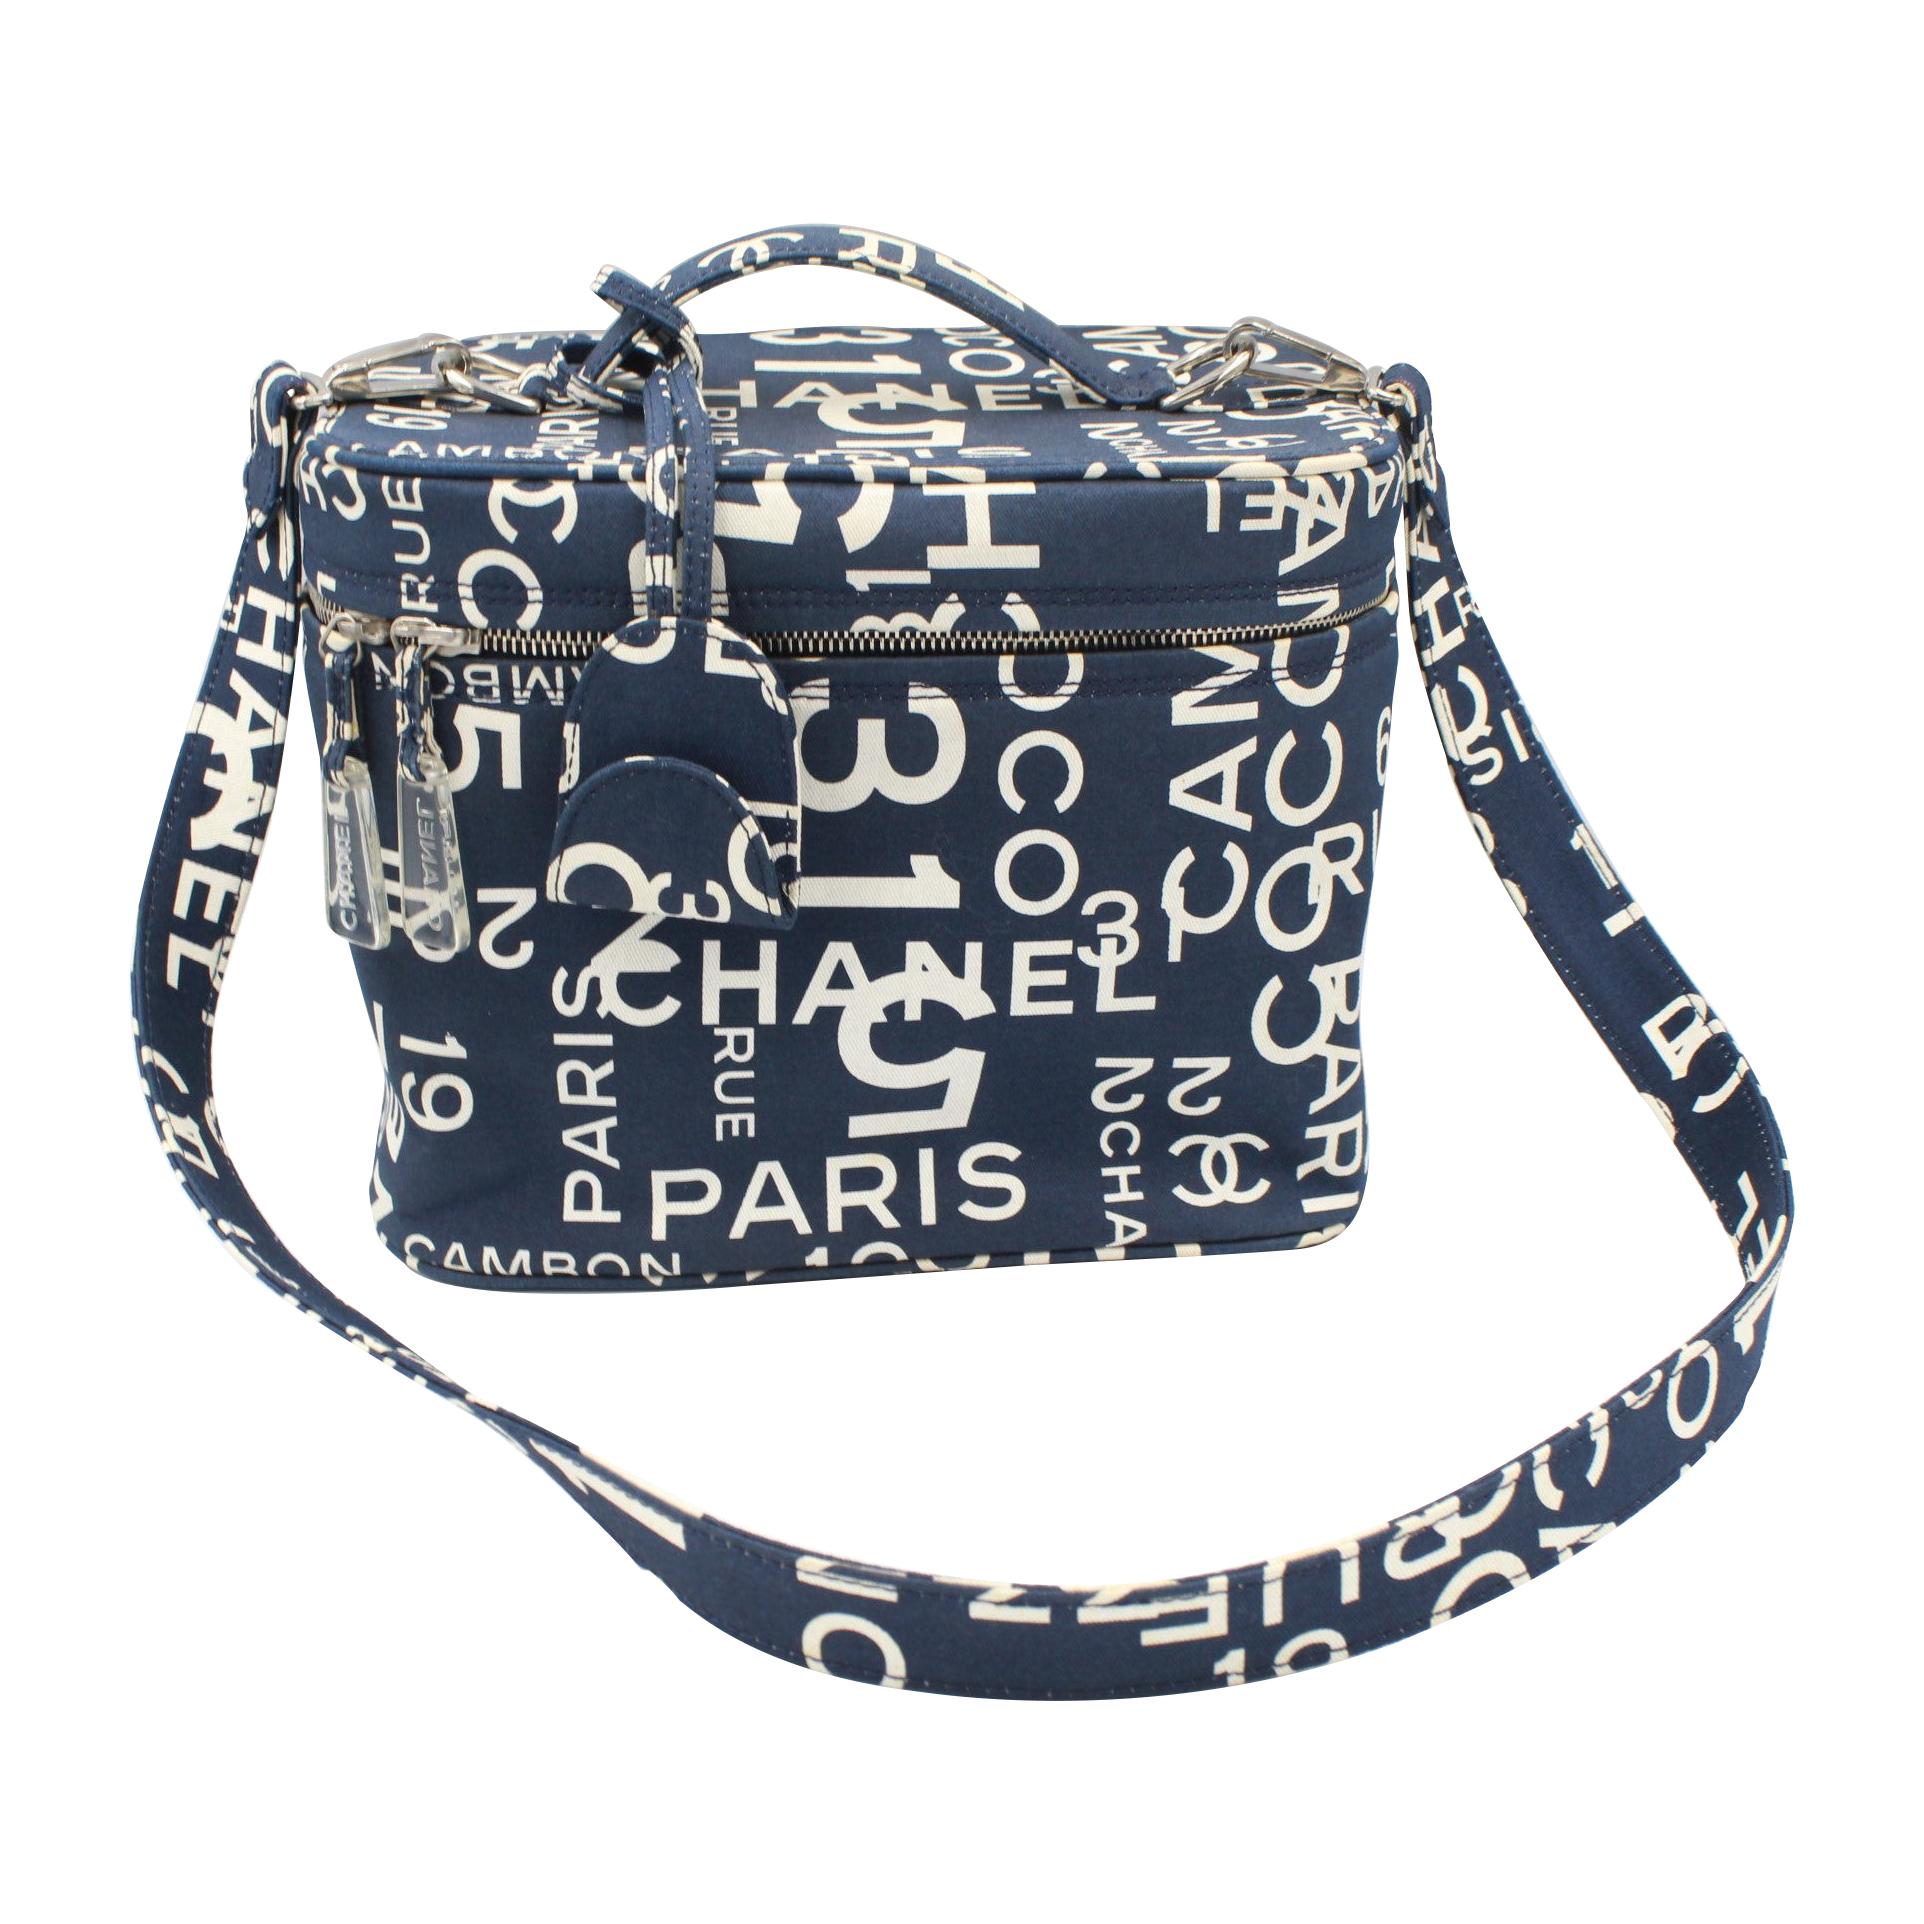 Chanel vanity case in canvas, print « Cambon » For Sale